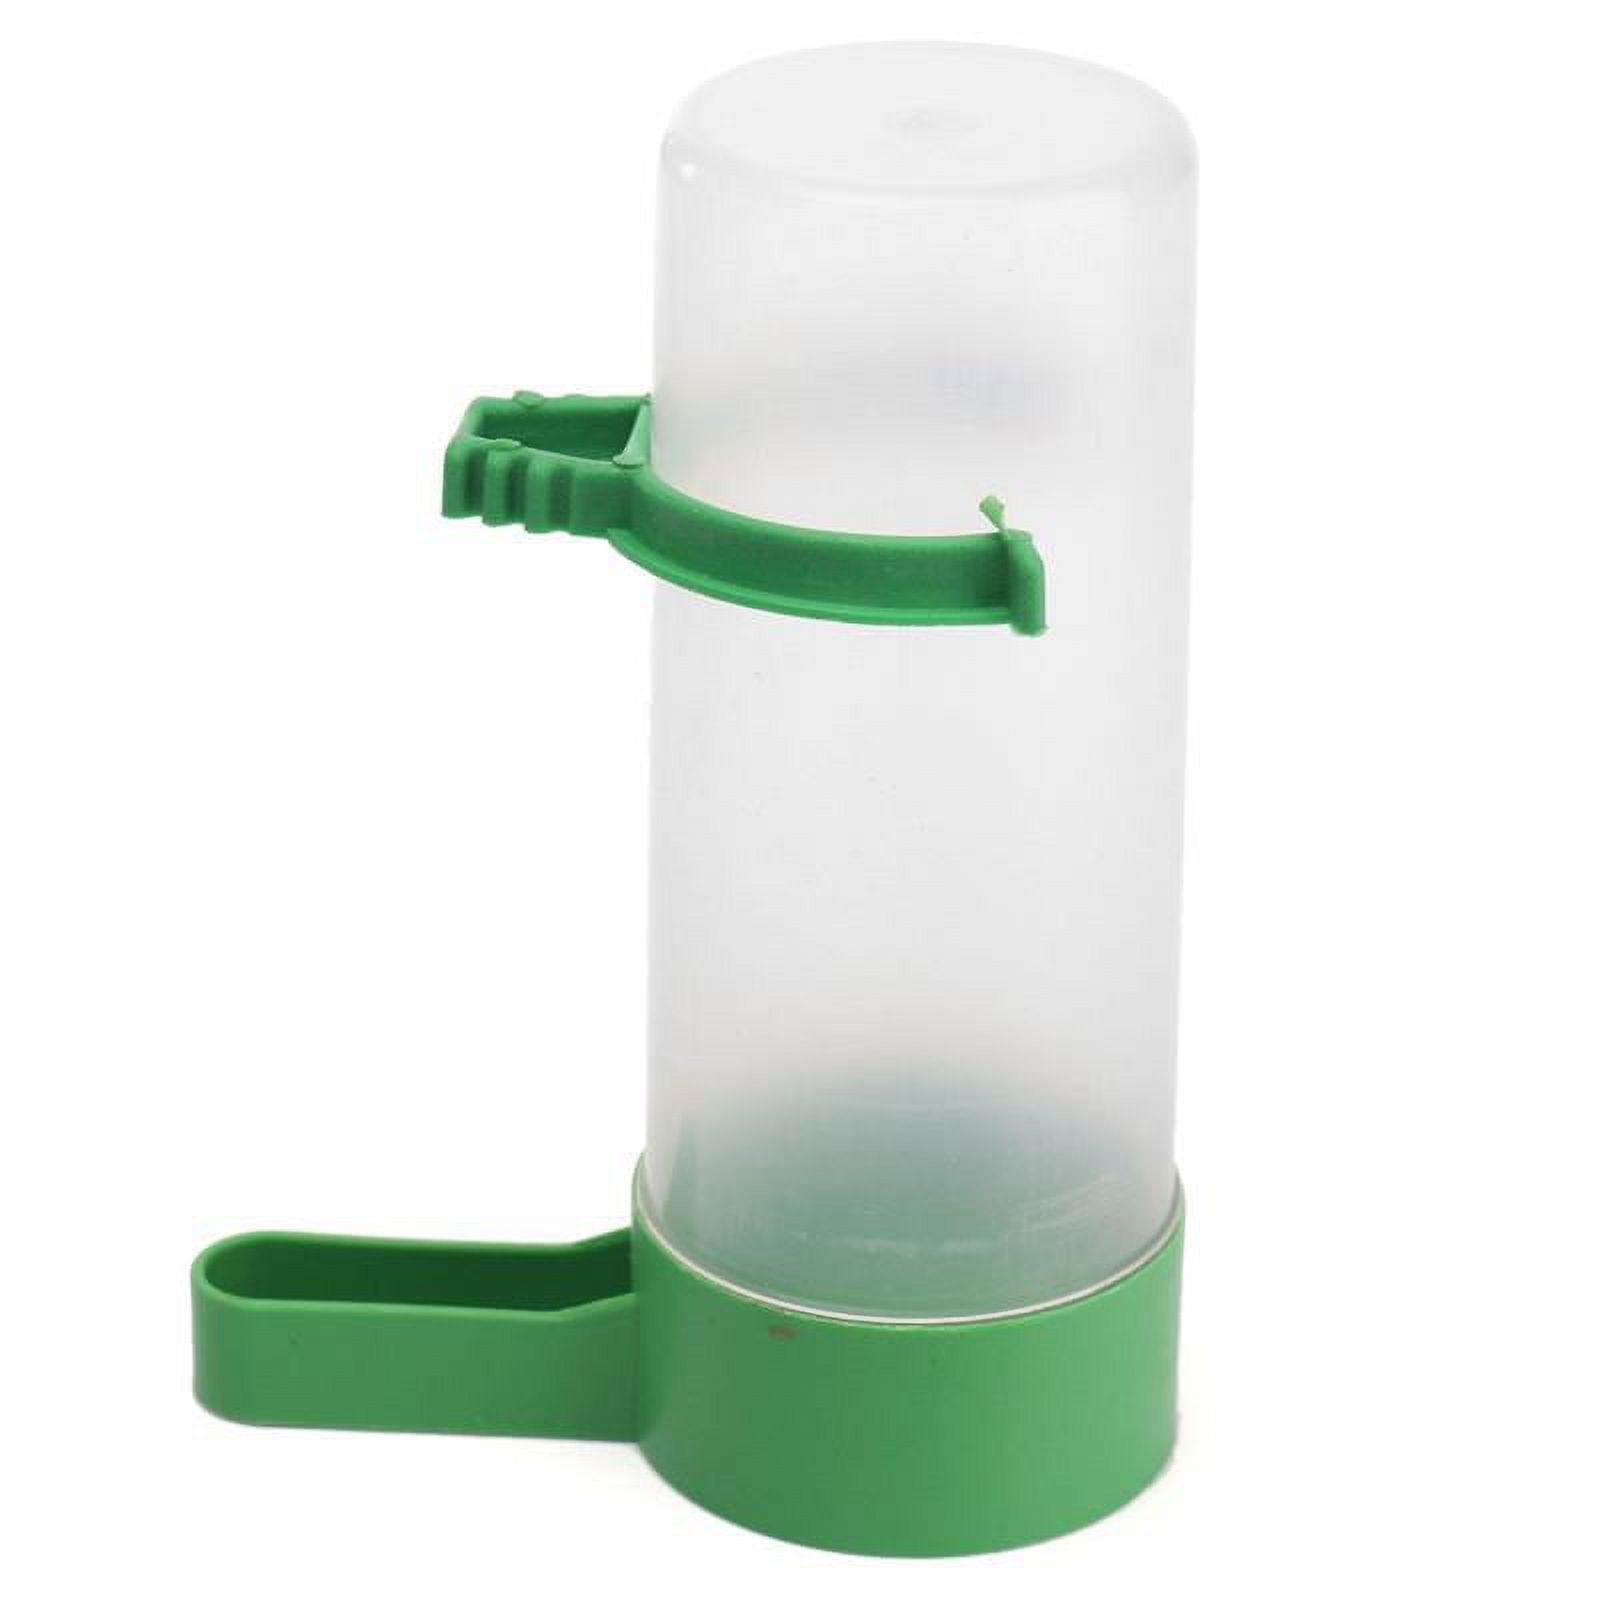 4PCS Plastic Pet Bird Drinker Feeder Water Bottle Cup For Cage Budgie Birds - image 2 of 5